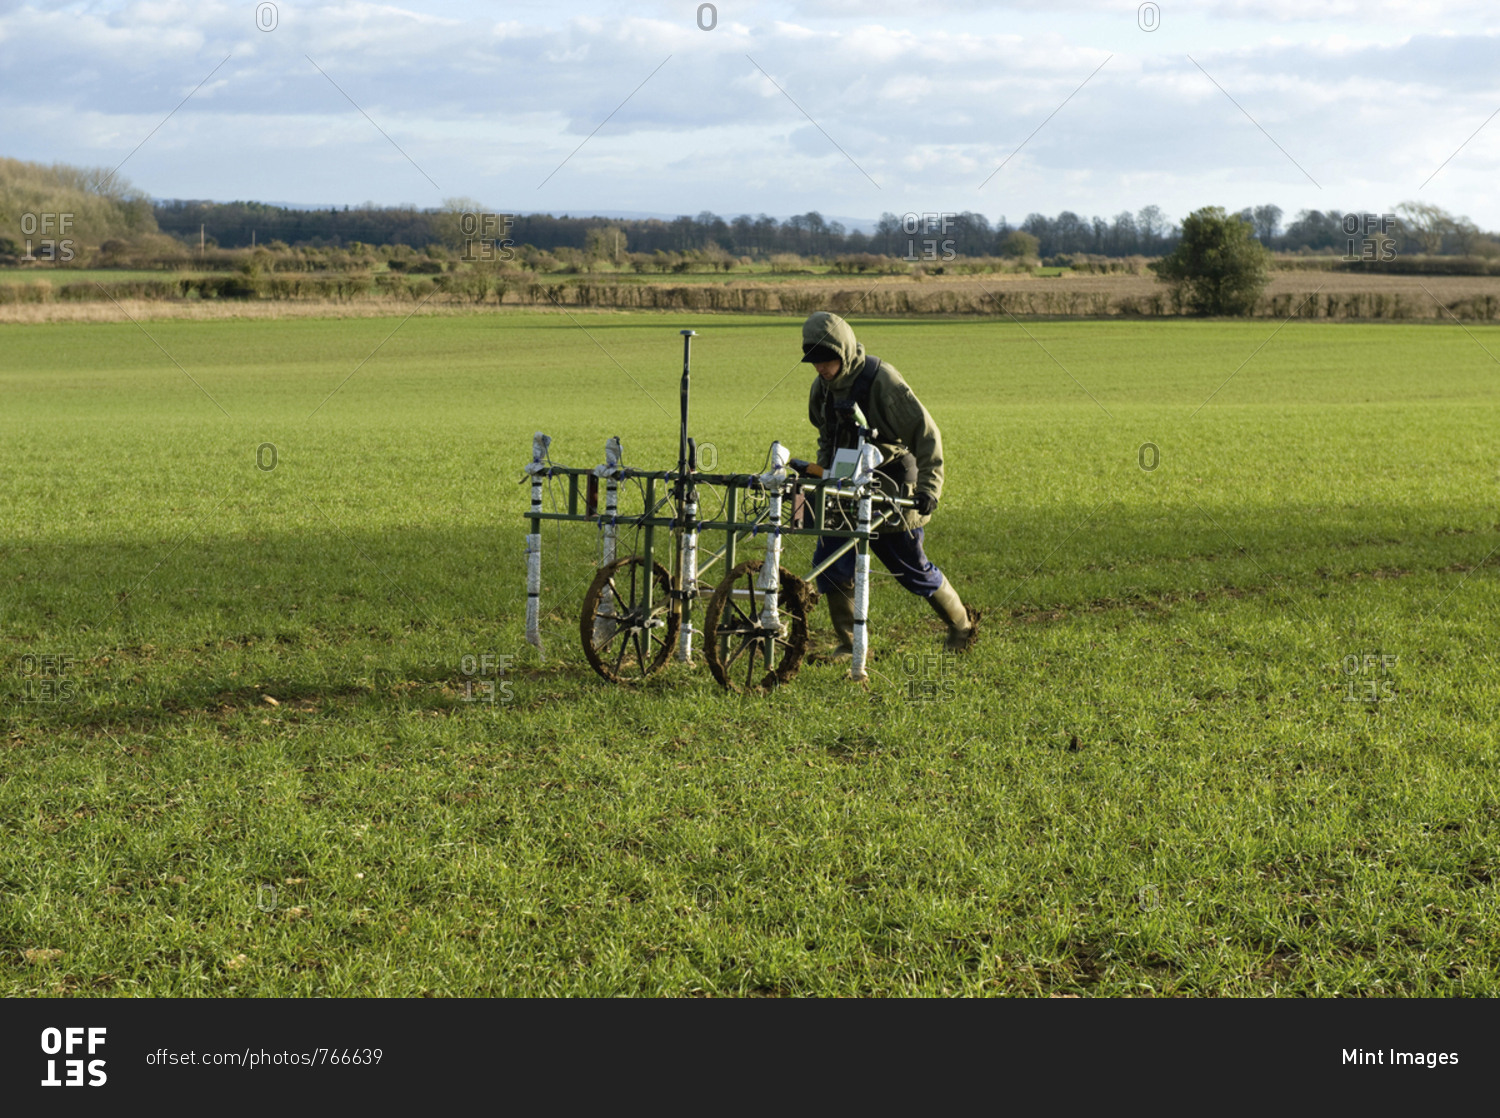 A geophysicist pushing a trolley with ground mapping sensors, creating a geophysical survey of the subsoil in a field.